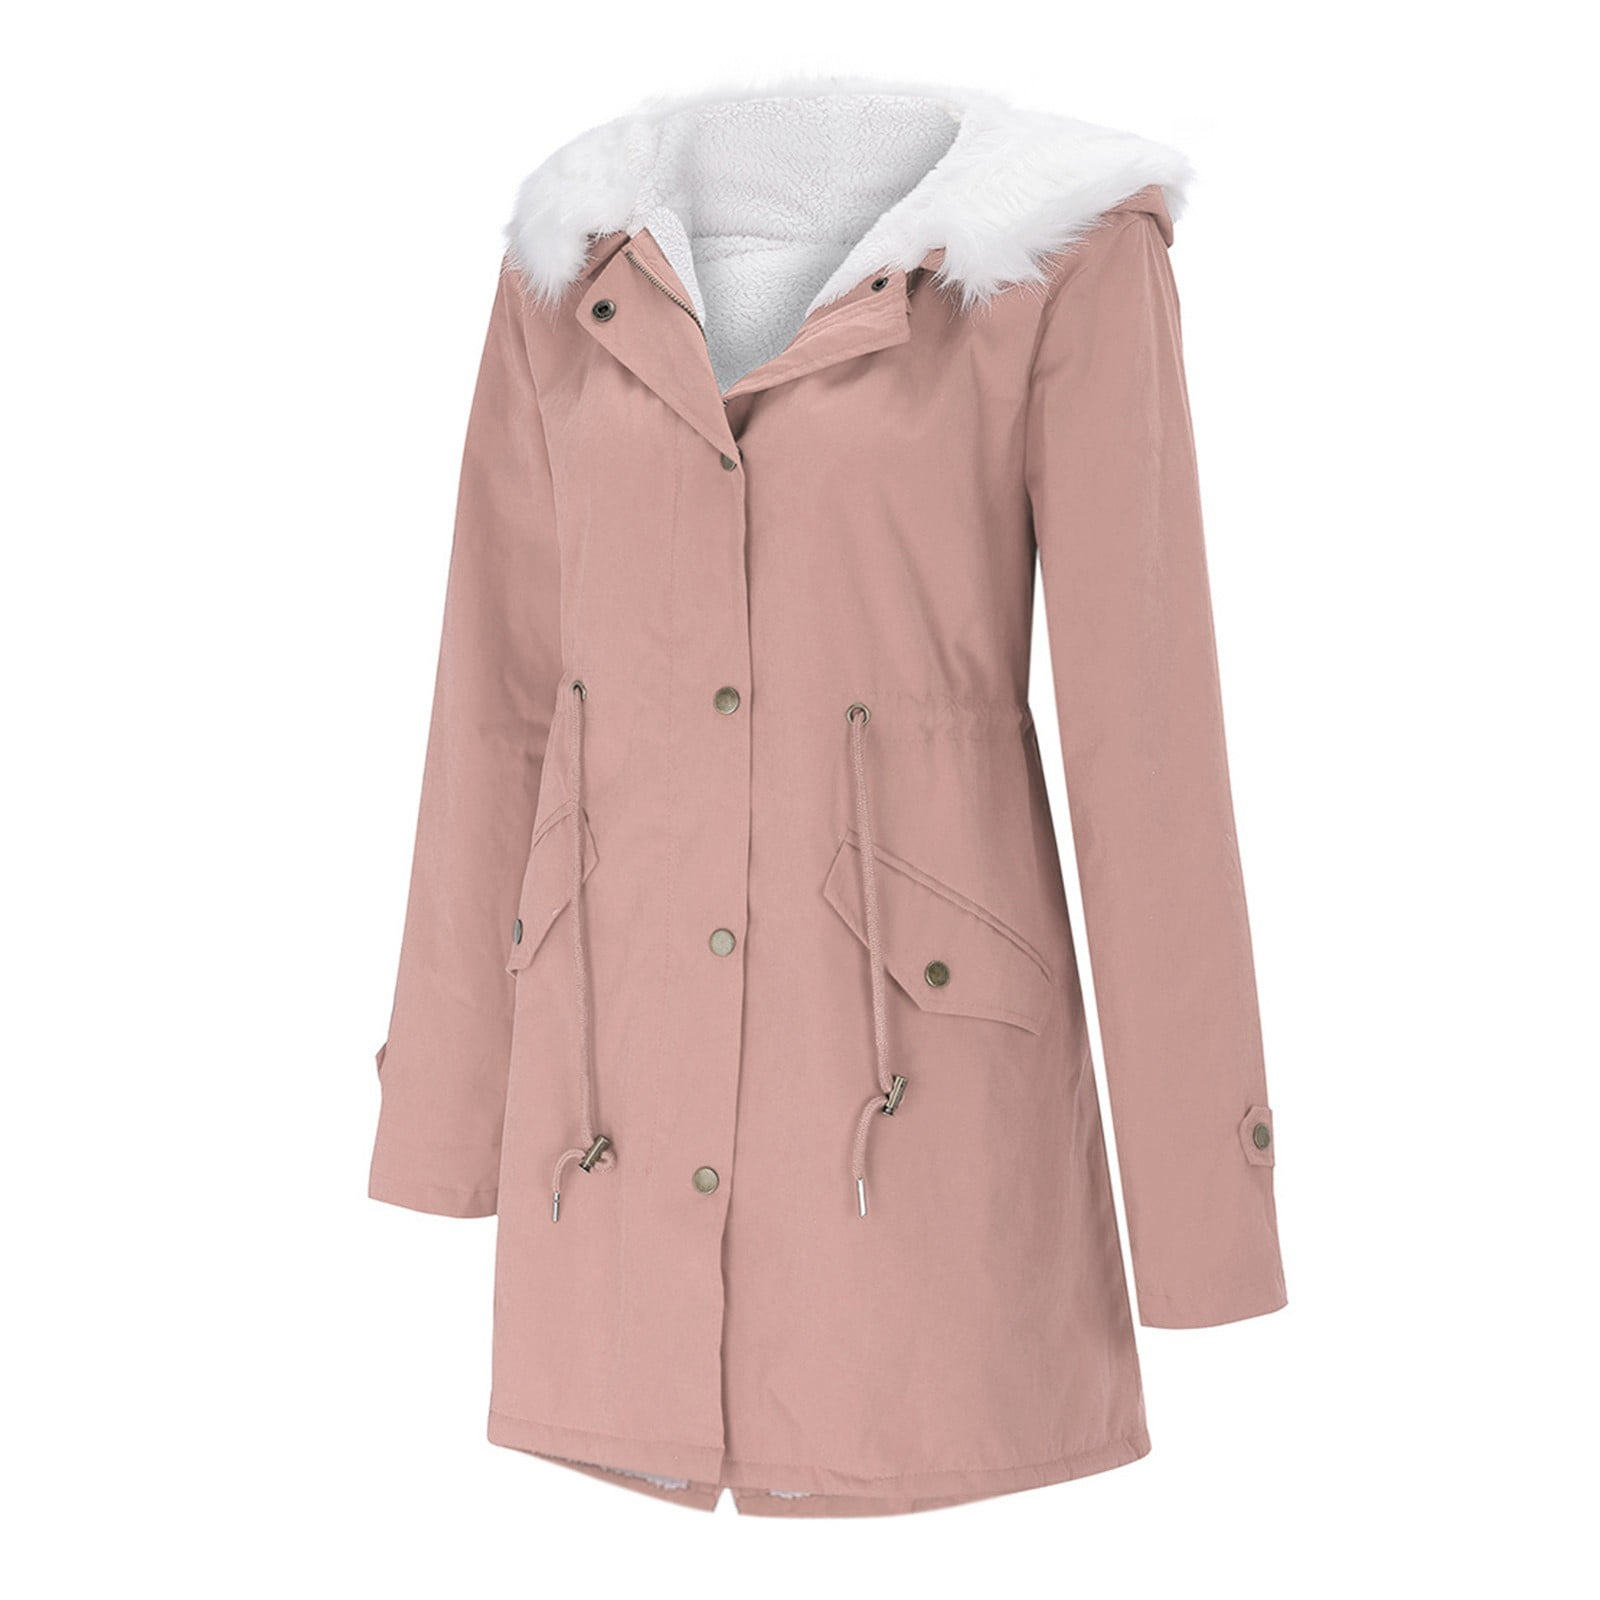 Women's Warm Hooded Thick Padded Outerwear Big Collar Jackets Bed ...